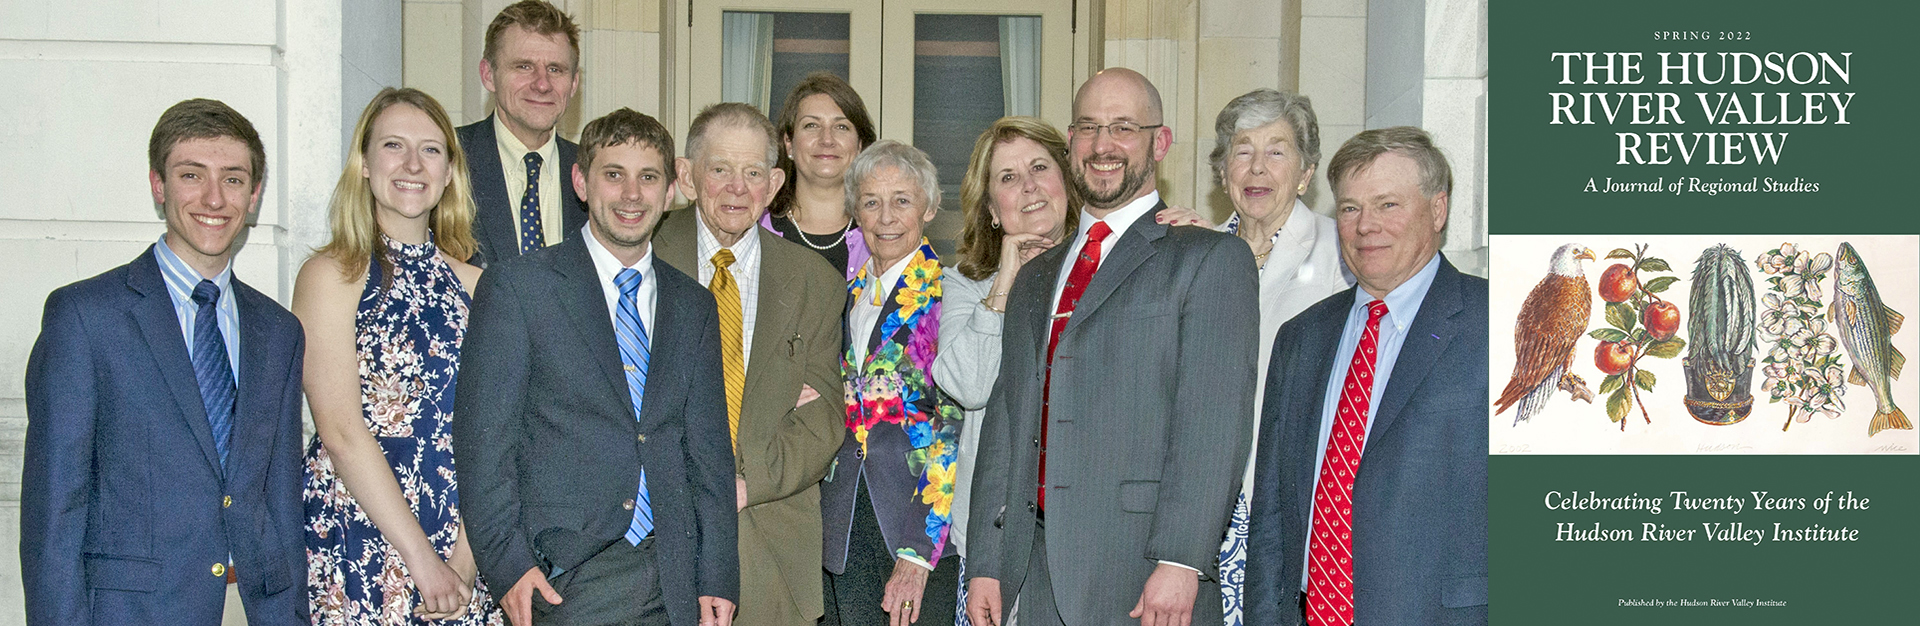 photo of HRVI staff and associates at a formal event, overlaid with an image of the cover of the journal